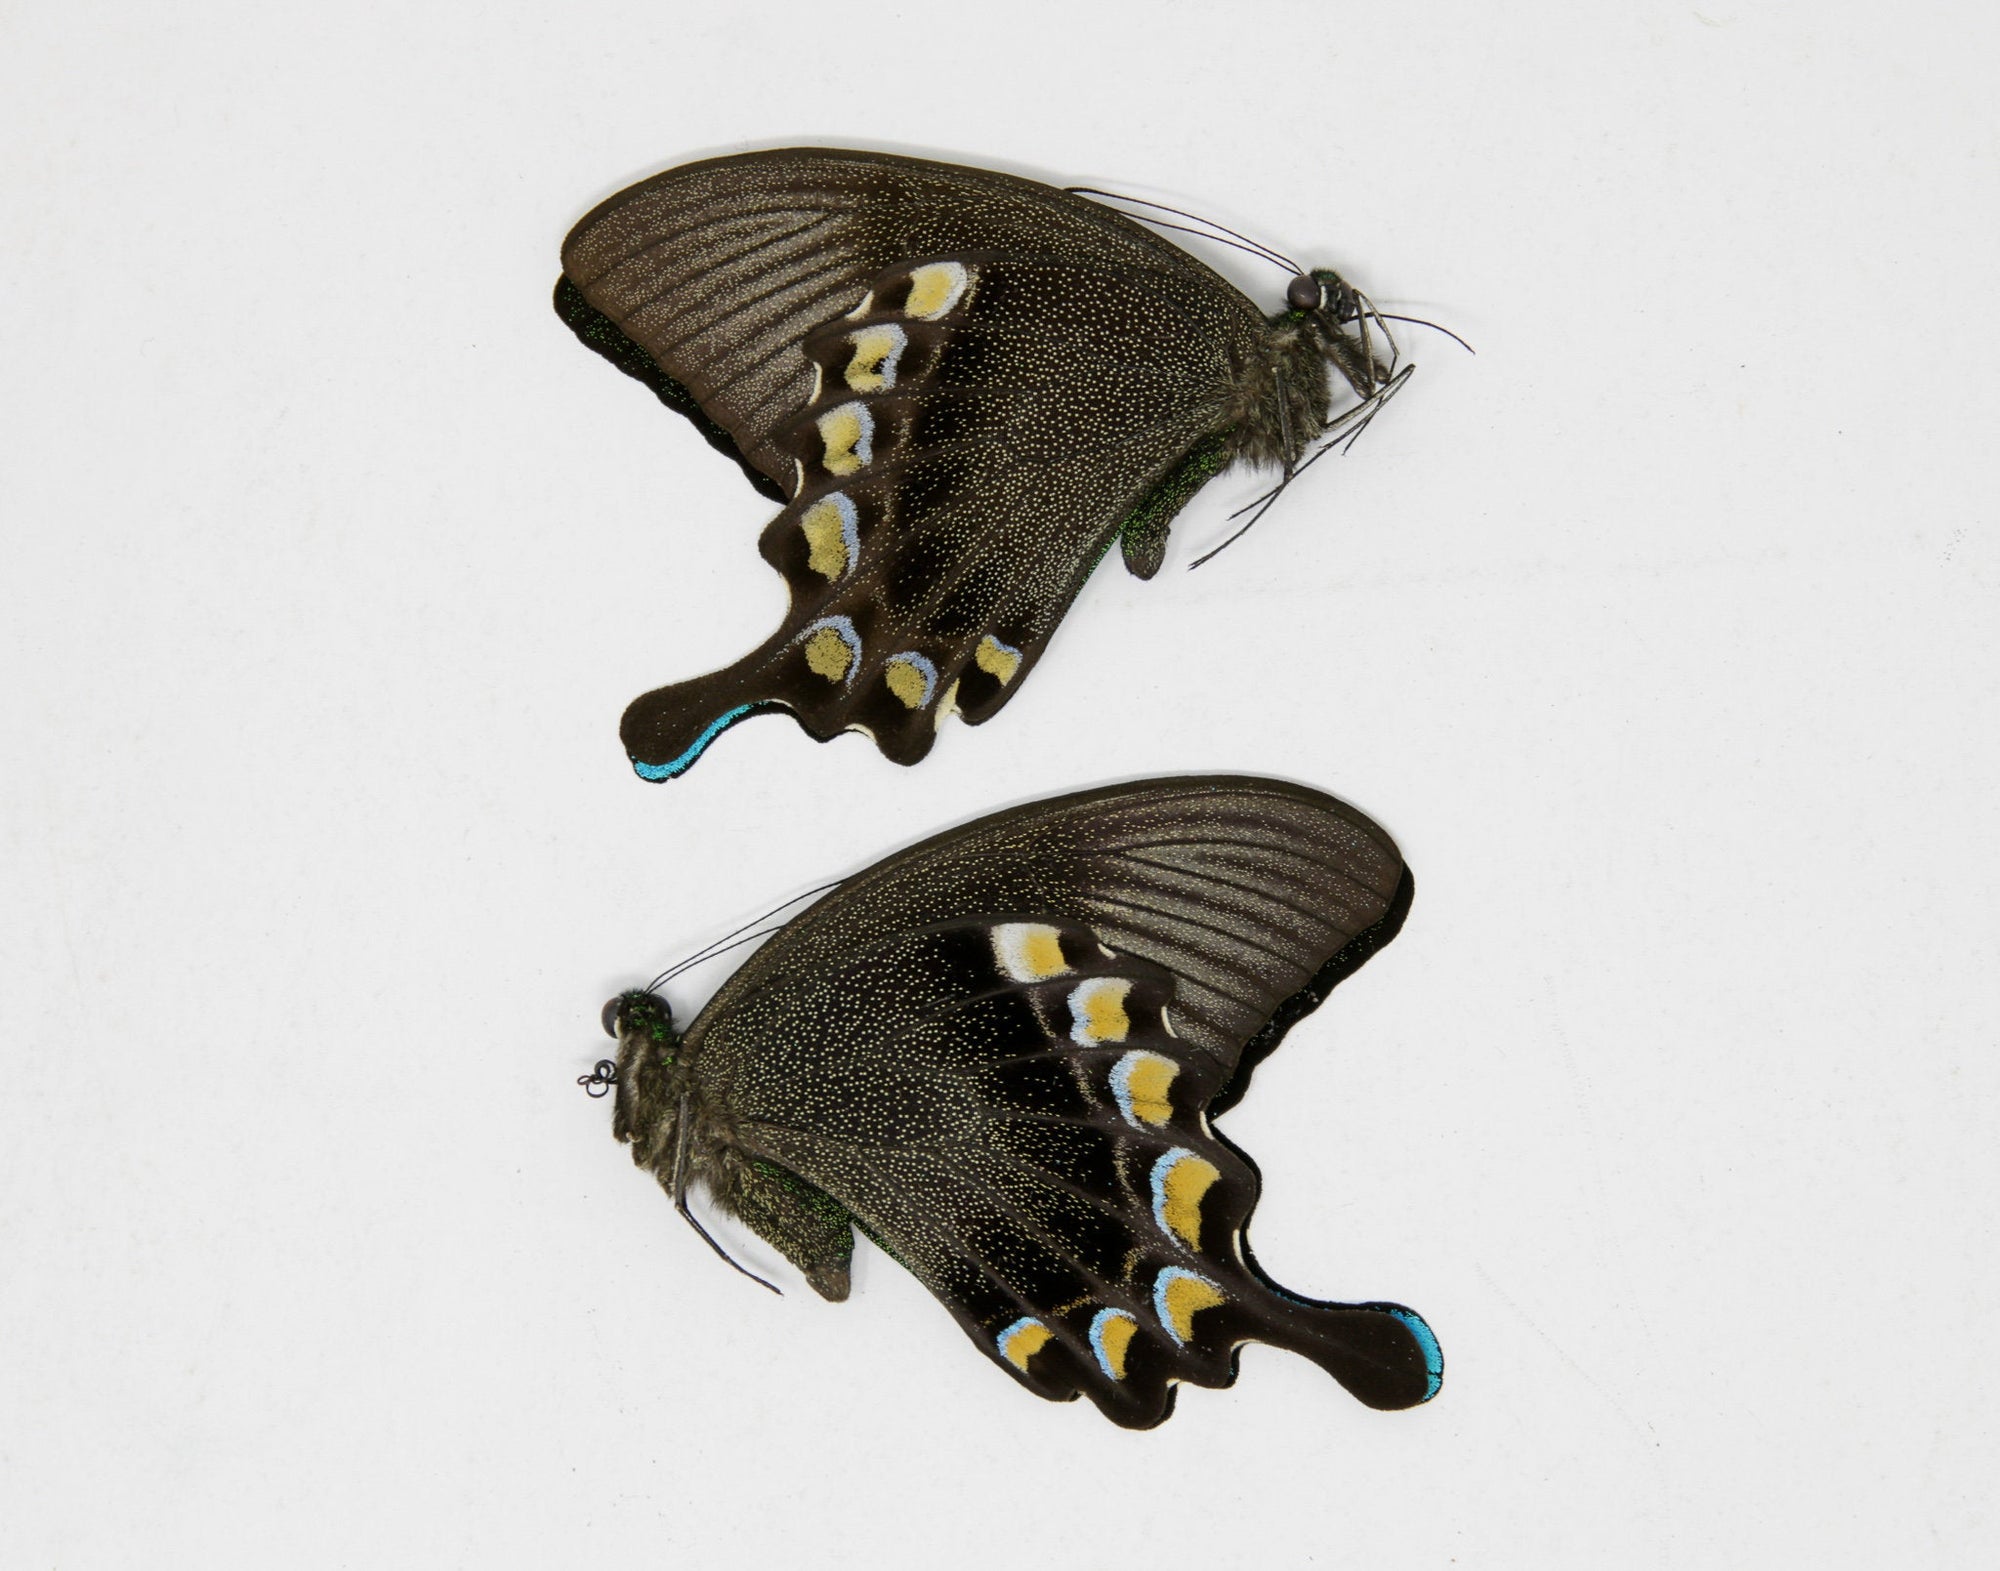 2 x Papilio blumei | The Green Swallowtail Butterfly | A1 Unmounted Specimens